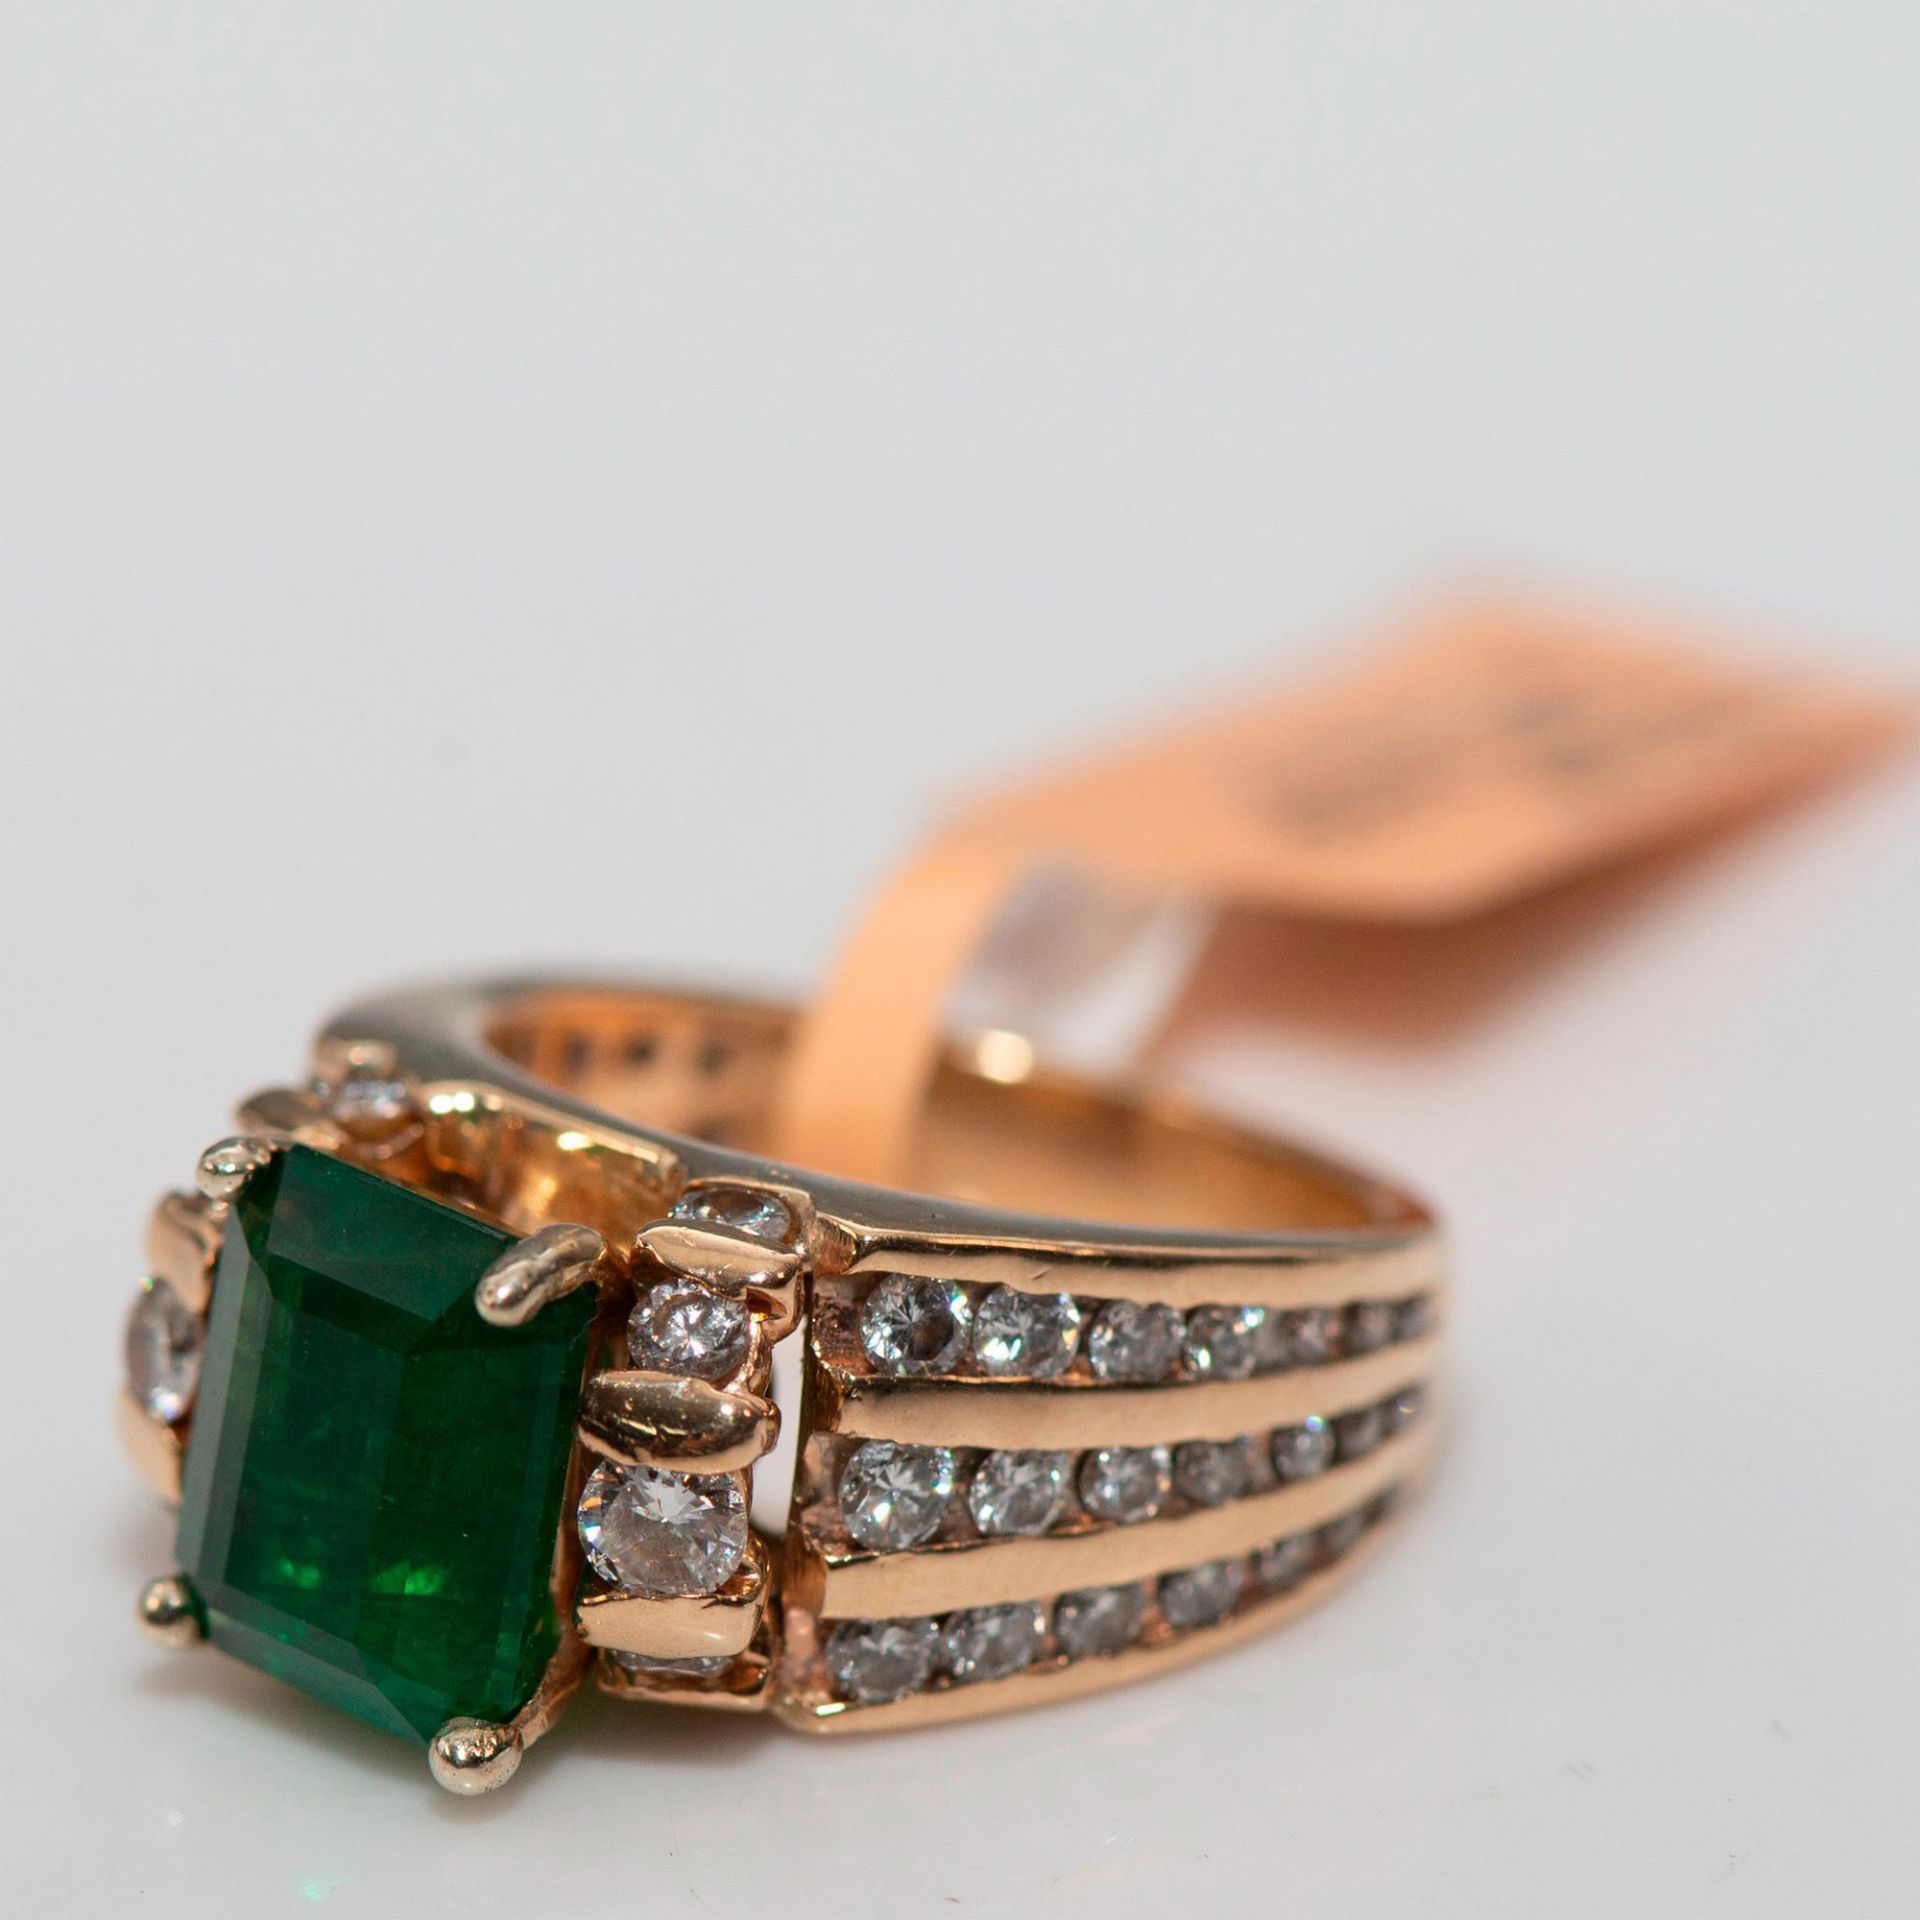 Luxurious Emerald and Diamonds 14K Yellow Gold Ring - Image 2 of 8